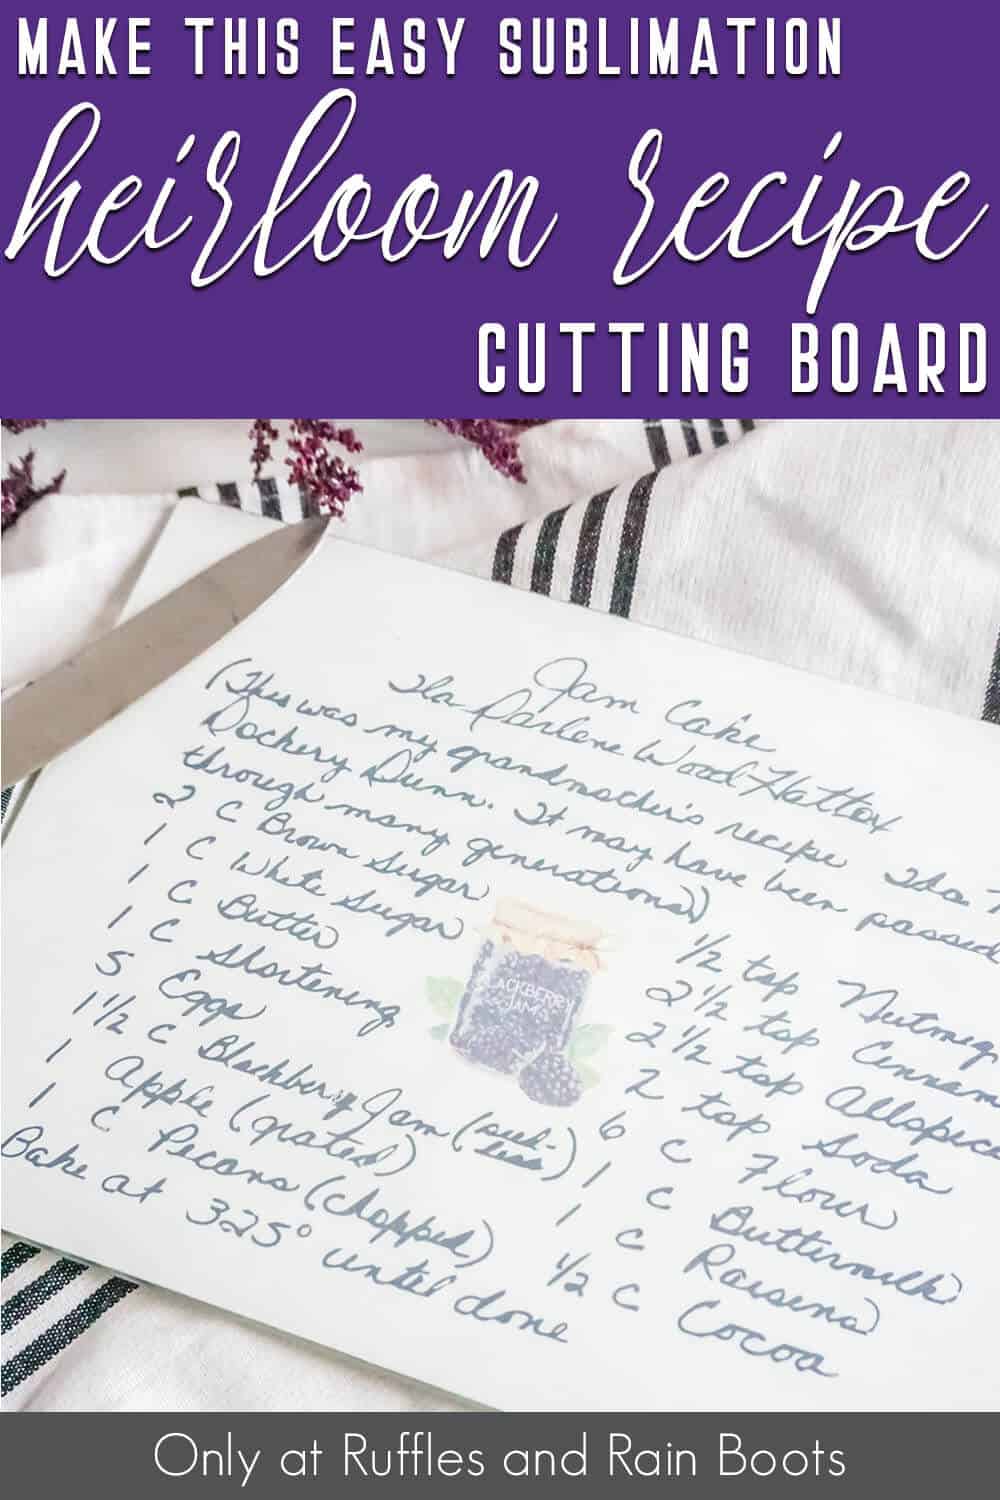 cutting board with an sublimation recipe with text which reads make this easy sublimation heirloom recipe cutting board